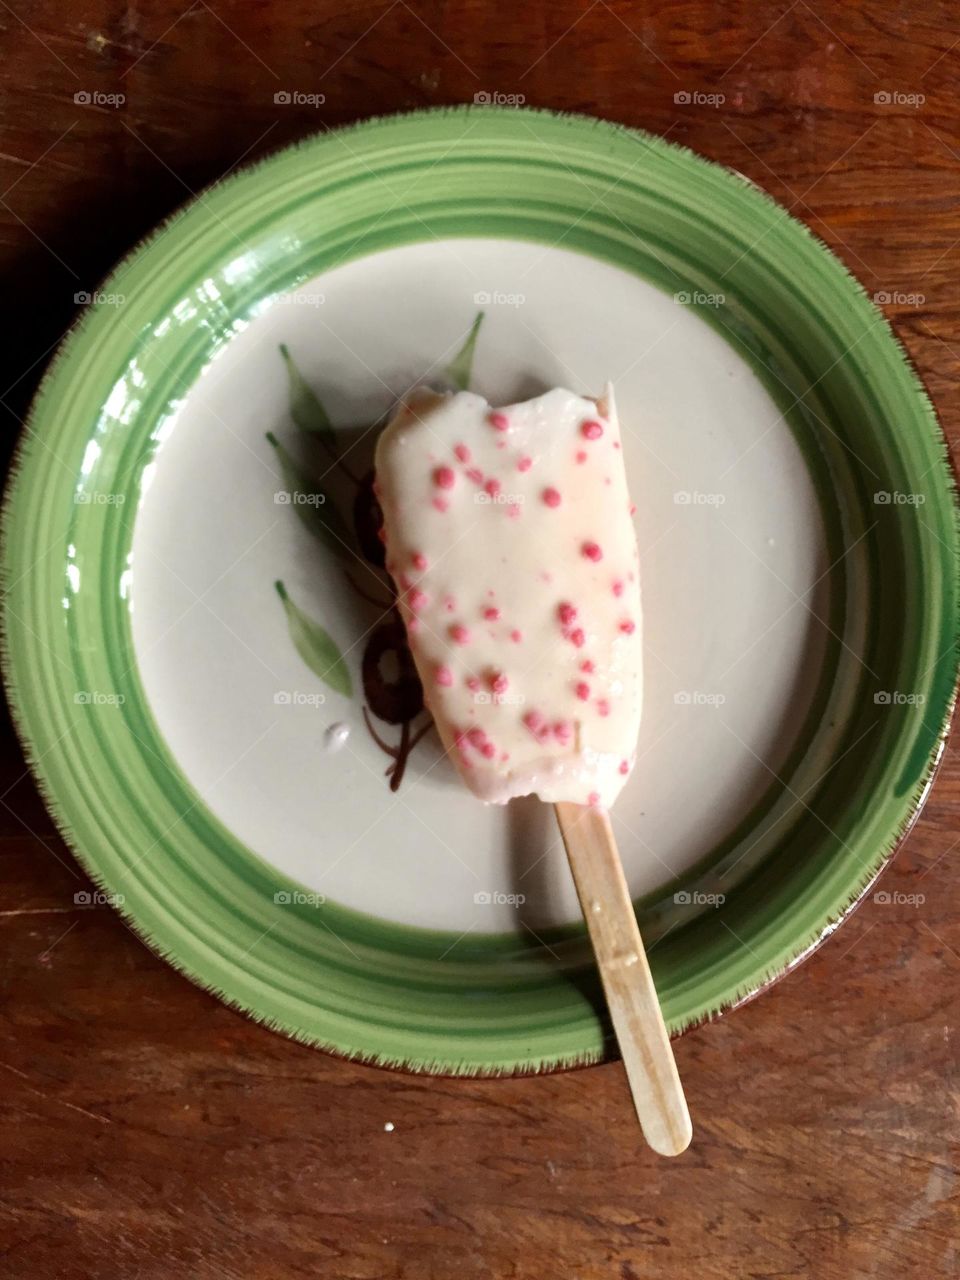 A melted ice cream on the stick. With strawberry flavor and put in a saucer.